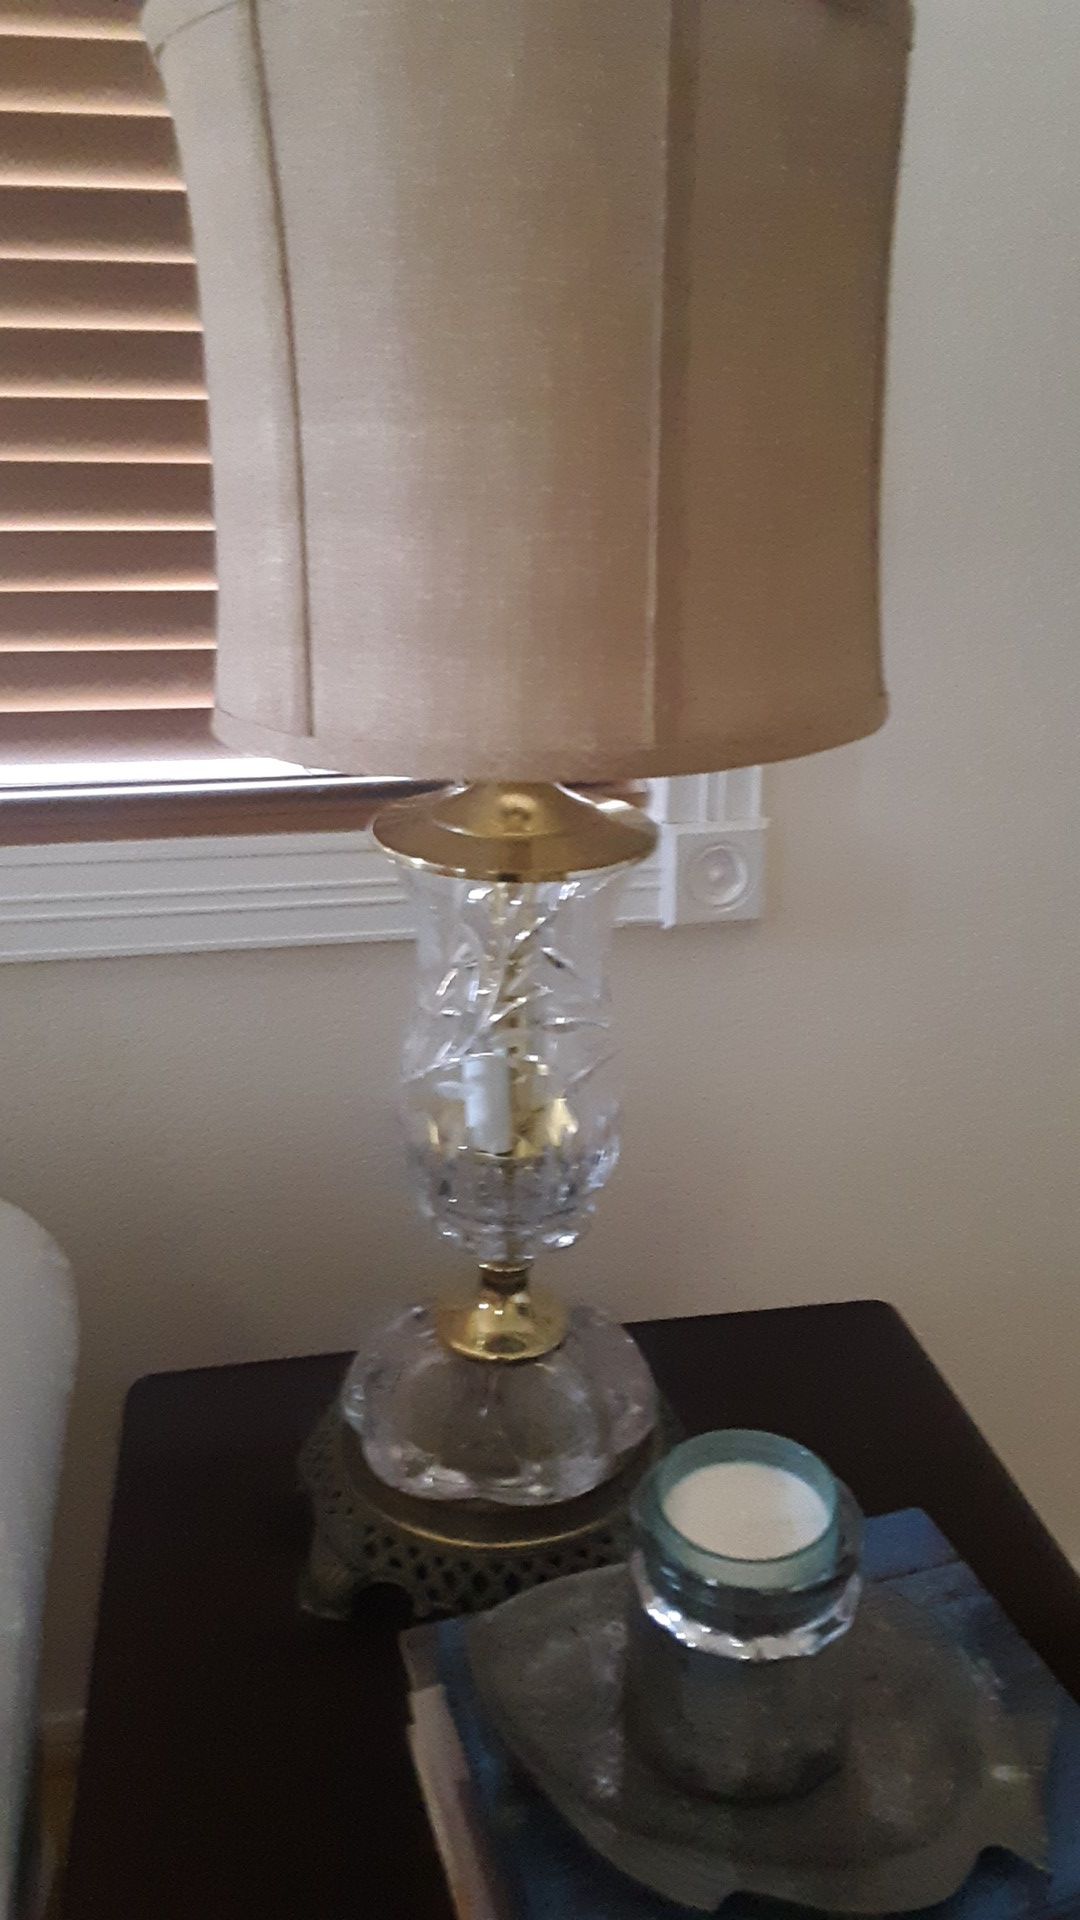 Chrystal lamps two brass trim .shades not included